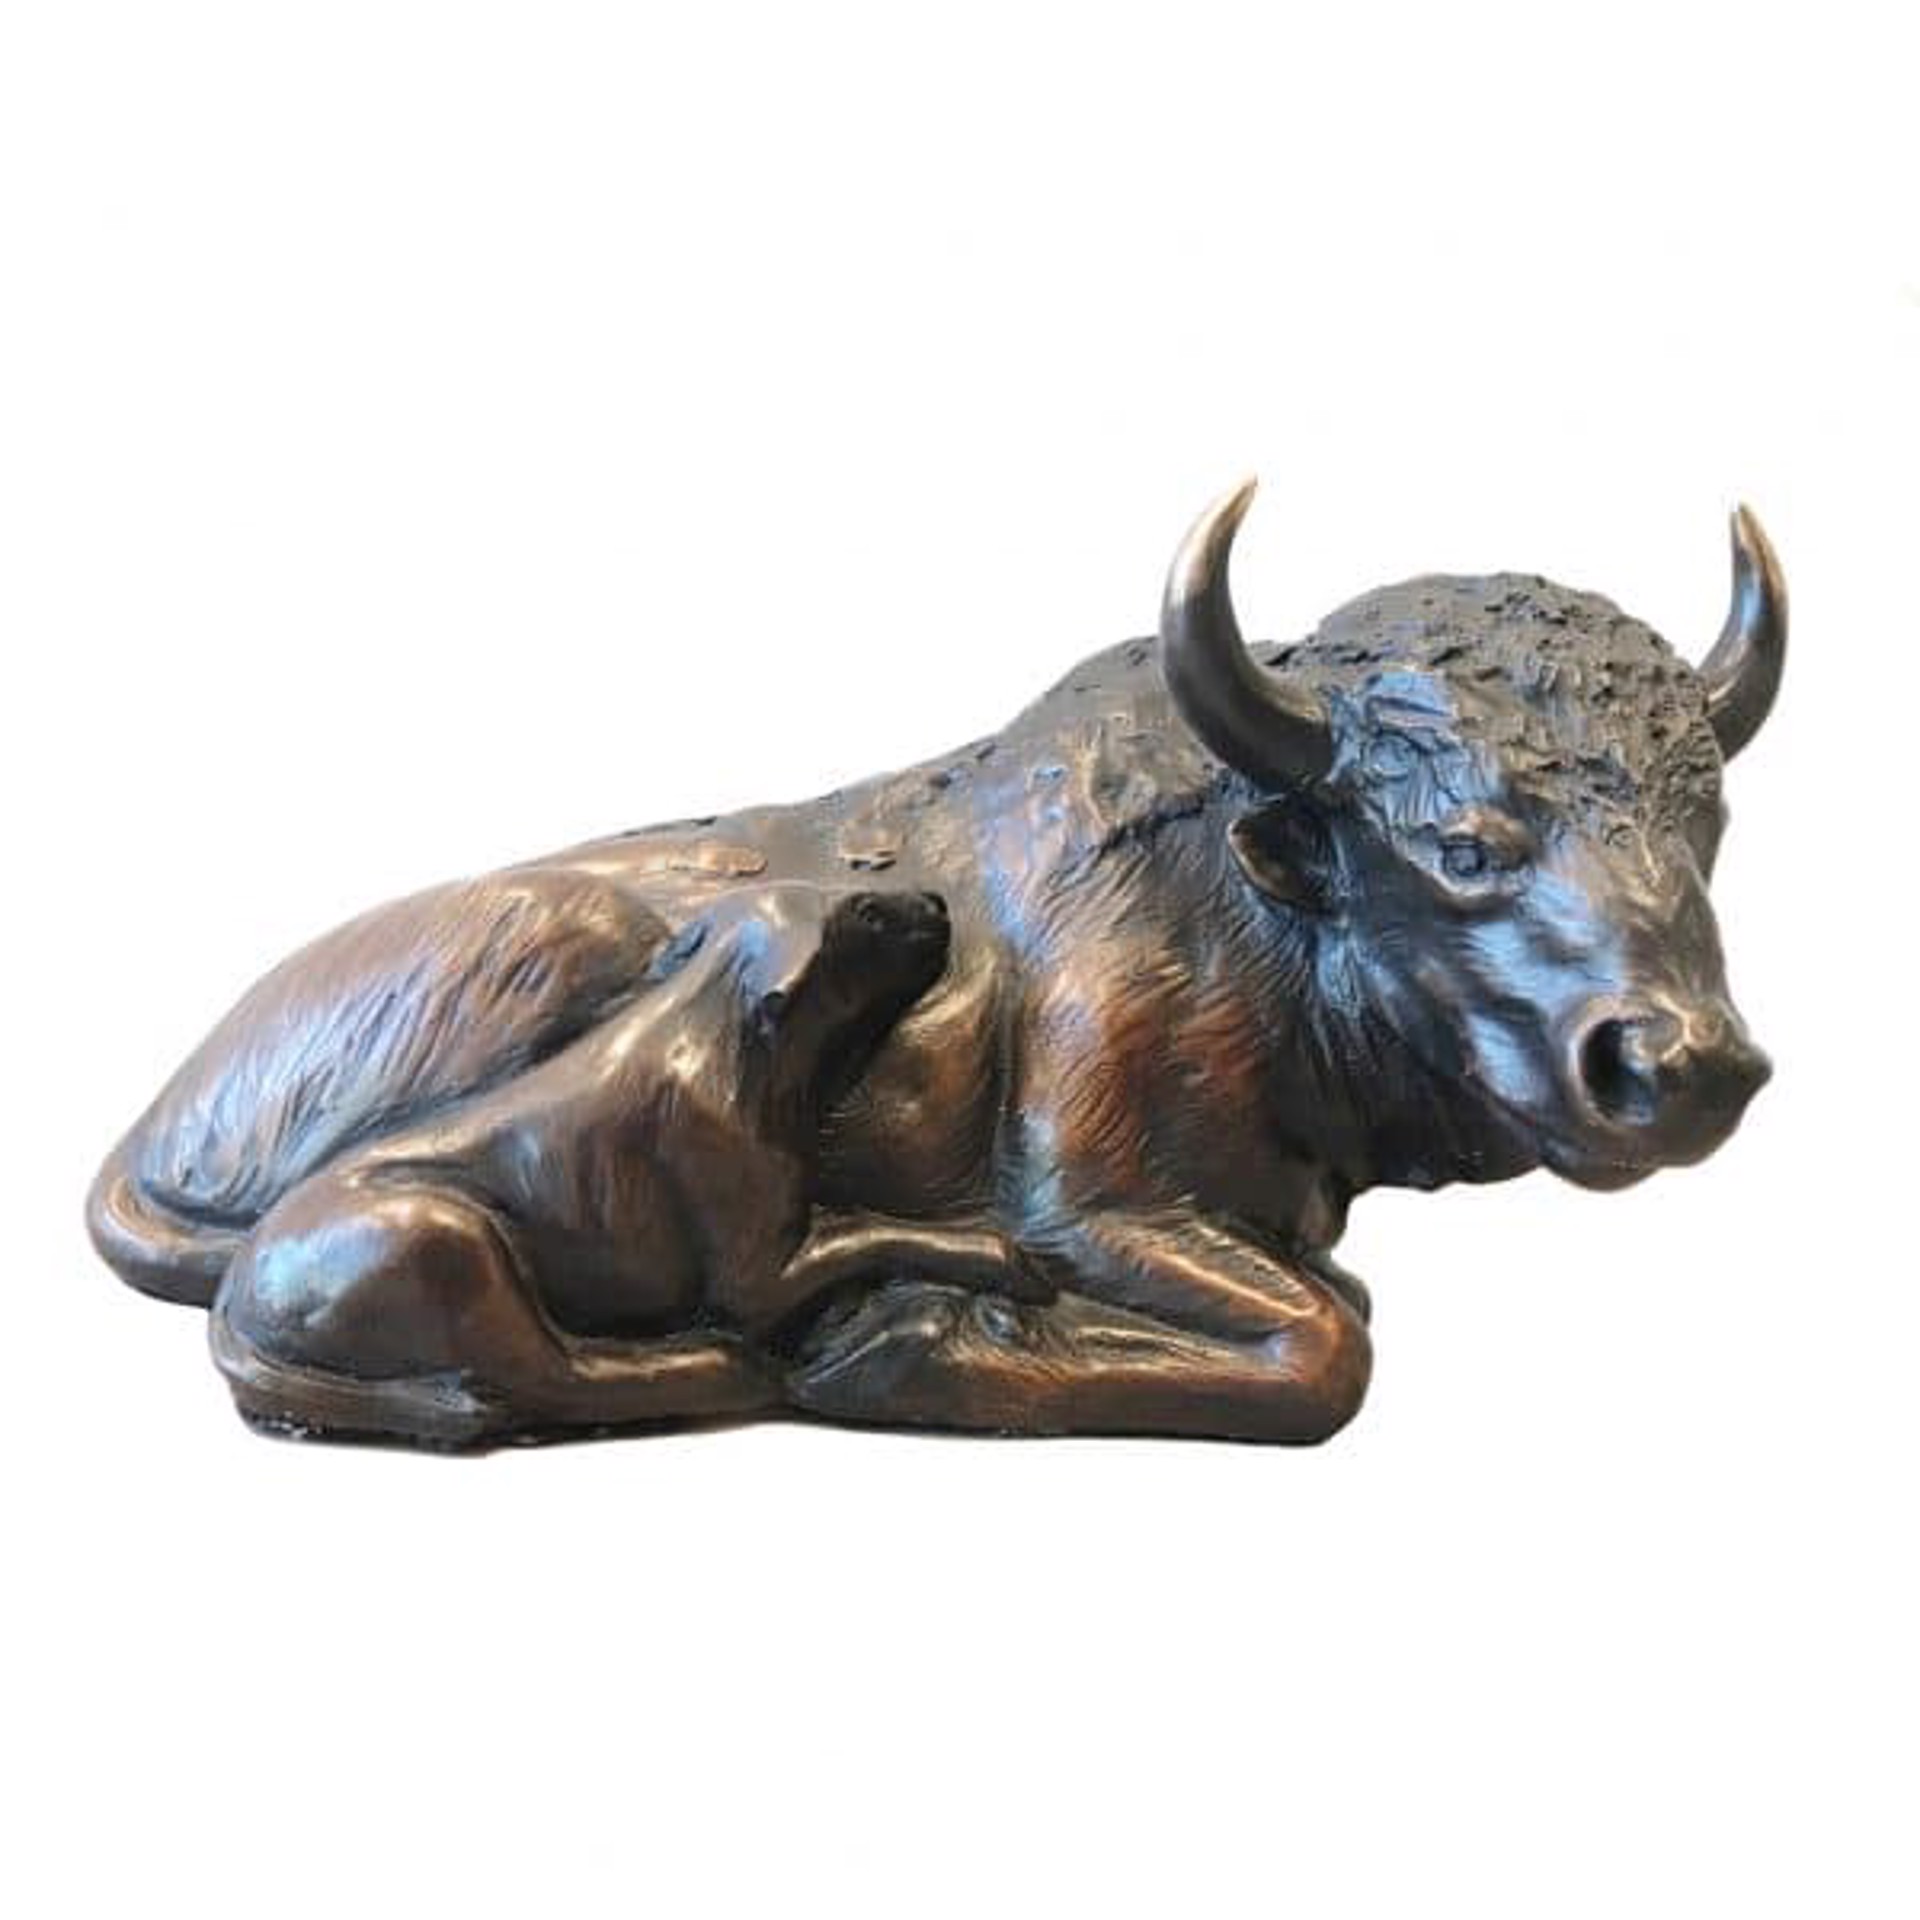 A Bronze Of A Cow Bison With Her Calf By Rip And Alison Caswell Available At Gallery Wild